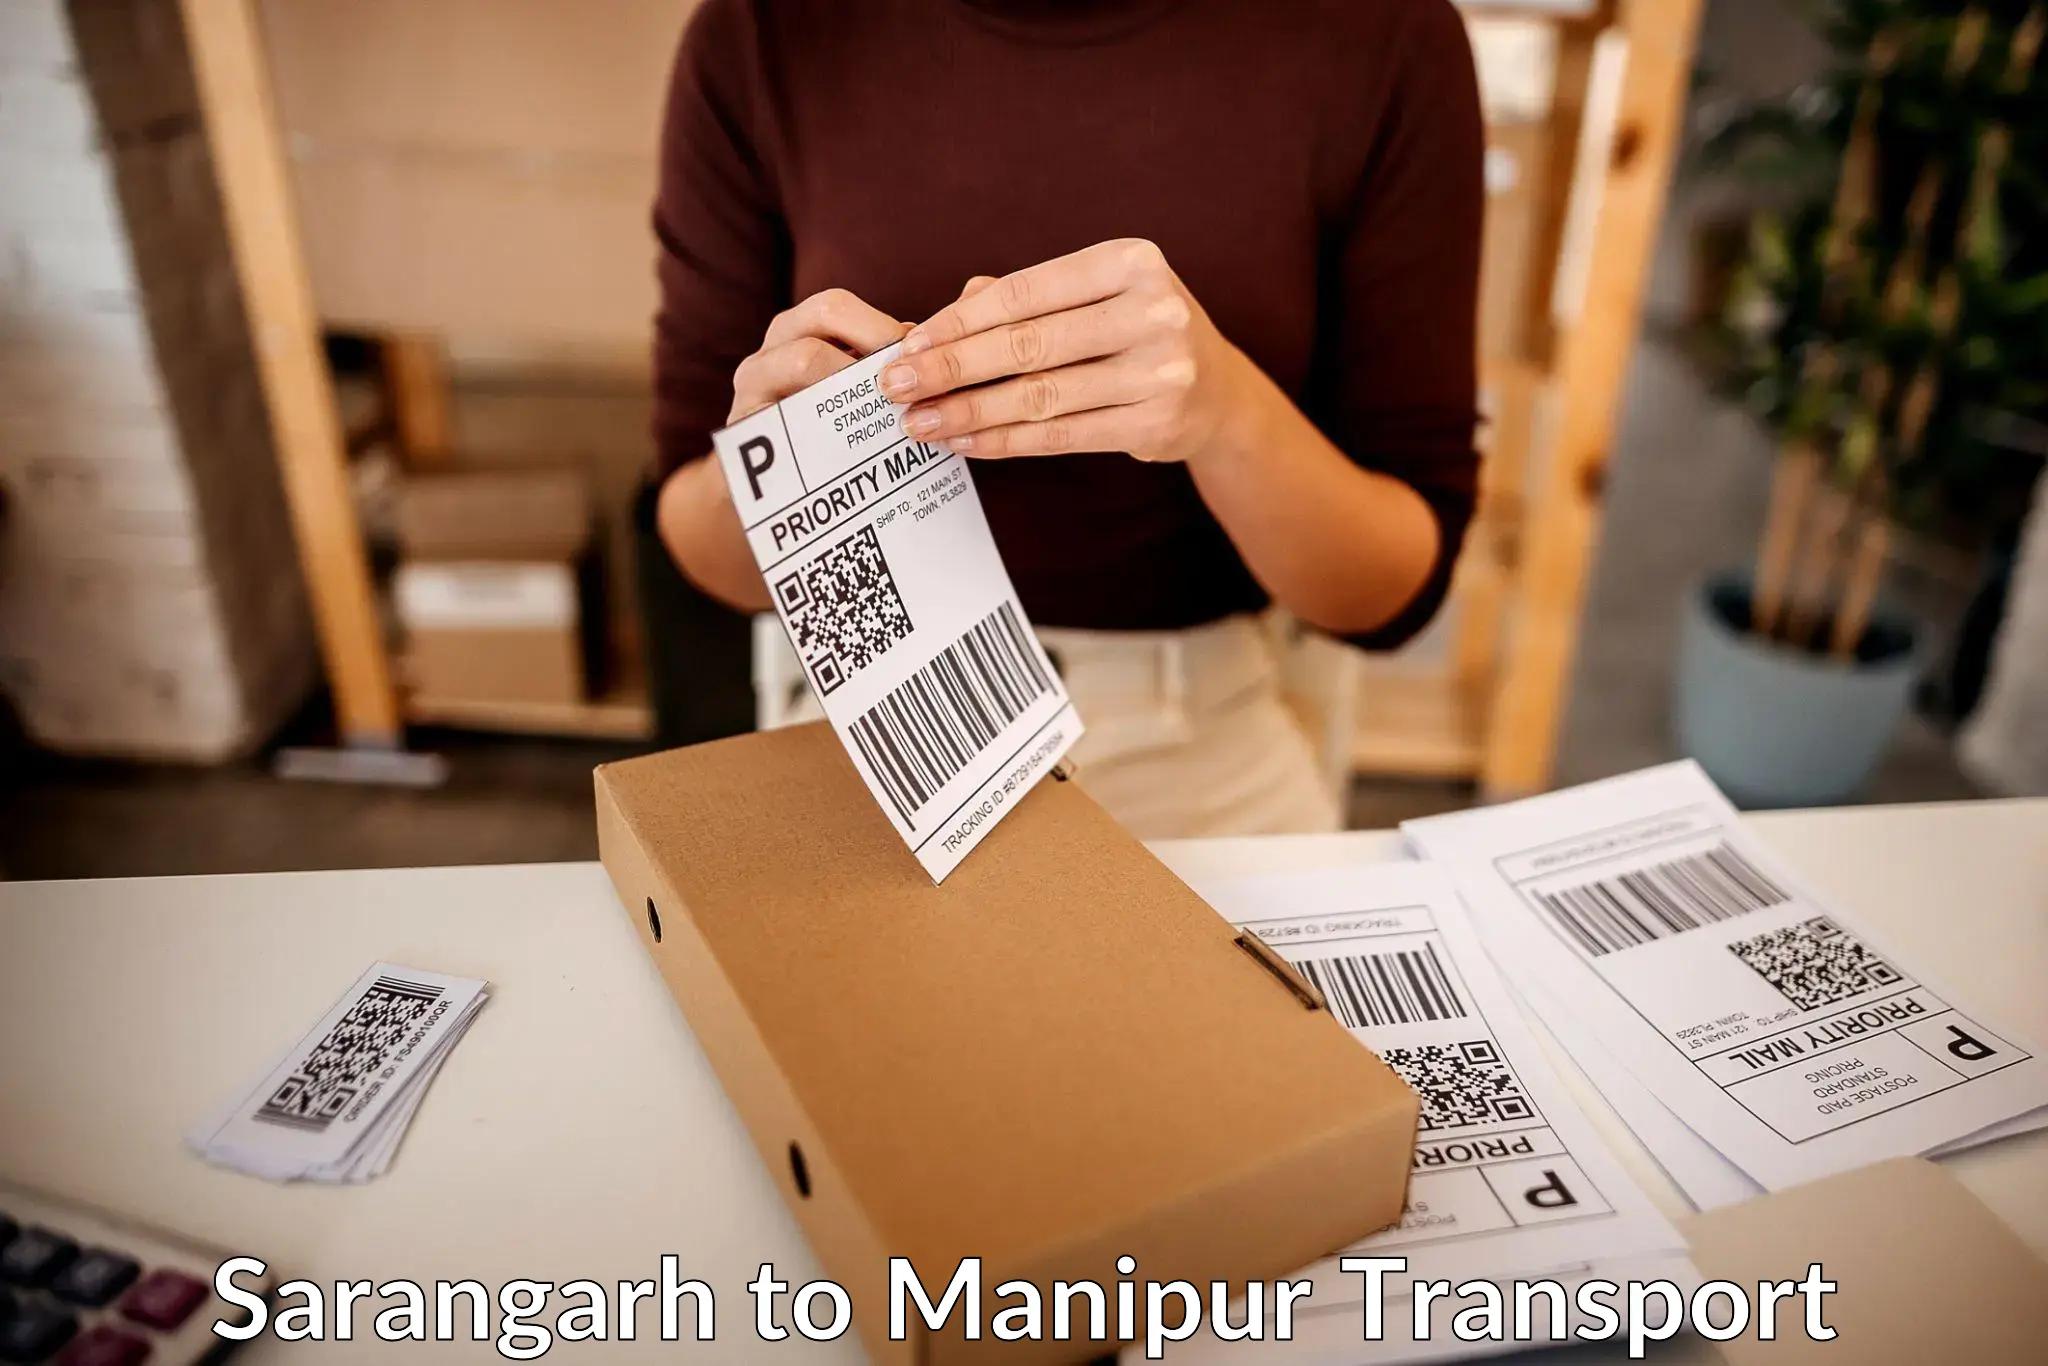 Air freight transport services in Sarangarh to Manipur